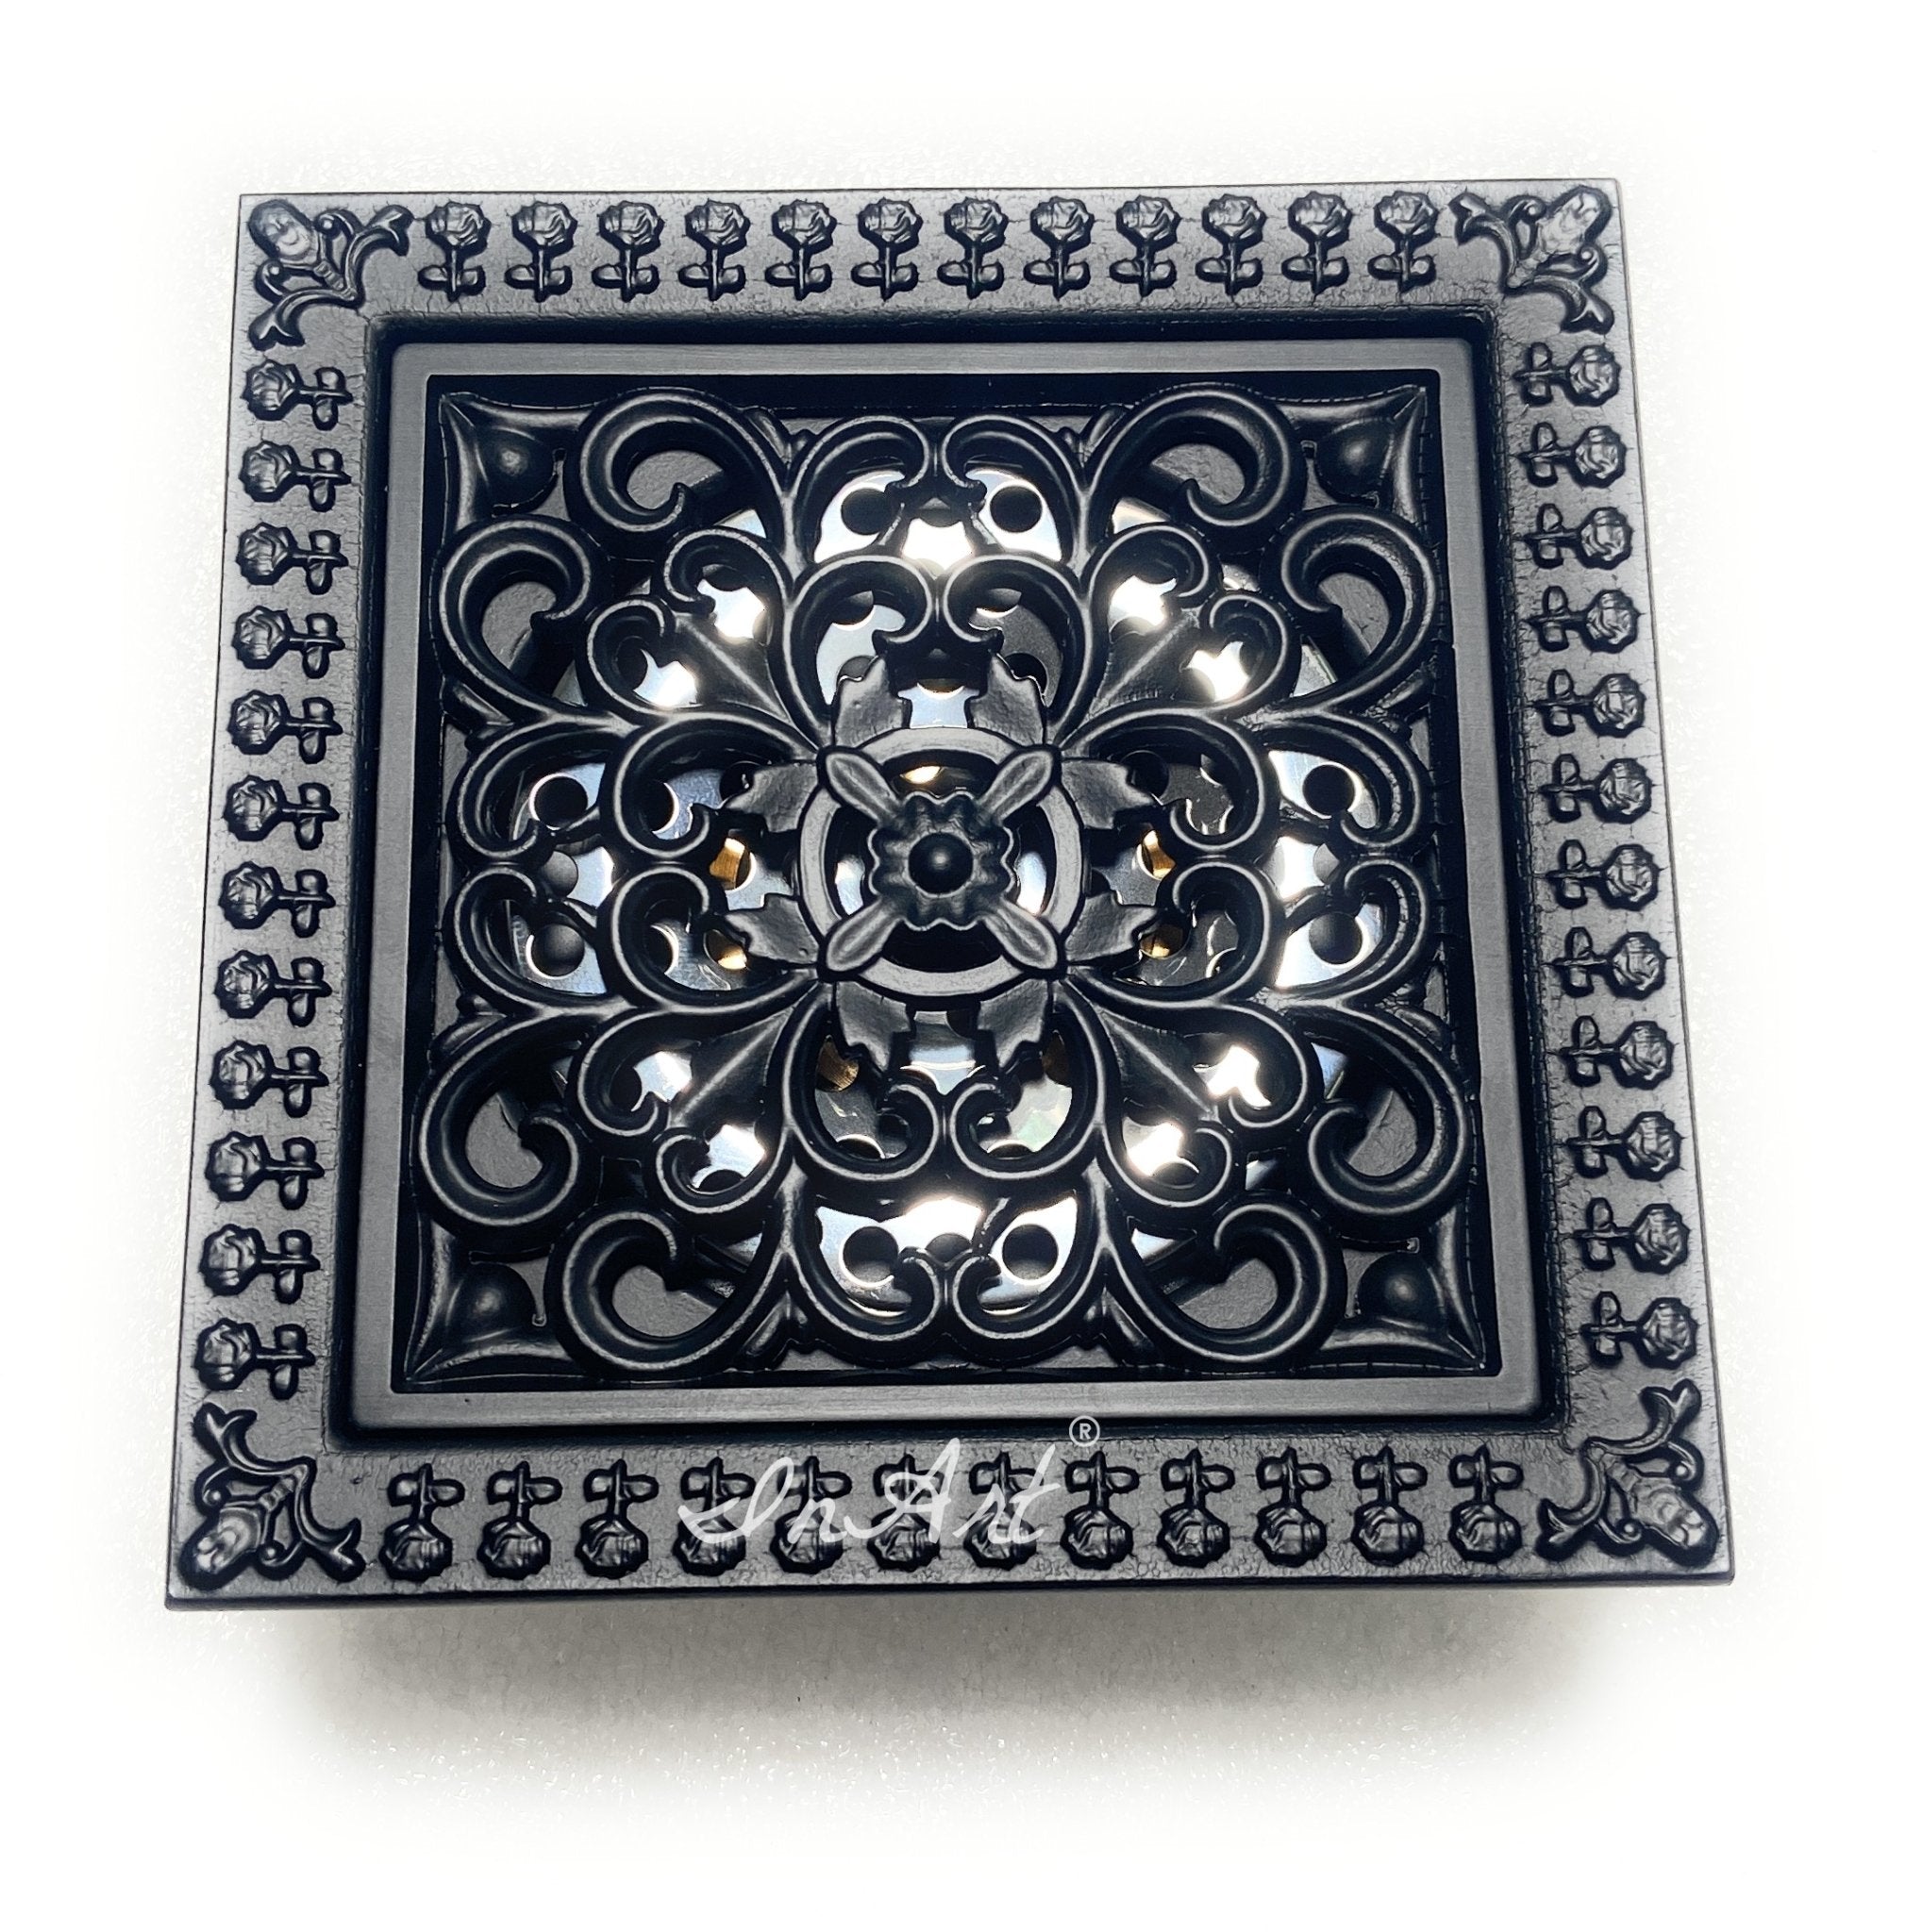 InArt Brass Square Shower Floor Drain with Removable Cover Grid Grate 5 inch Long Black Matt Color Floral - InArt-Studio-USA